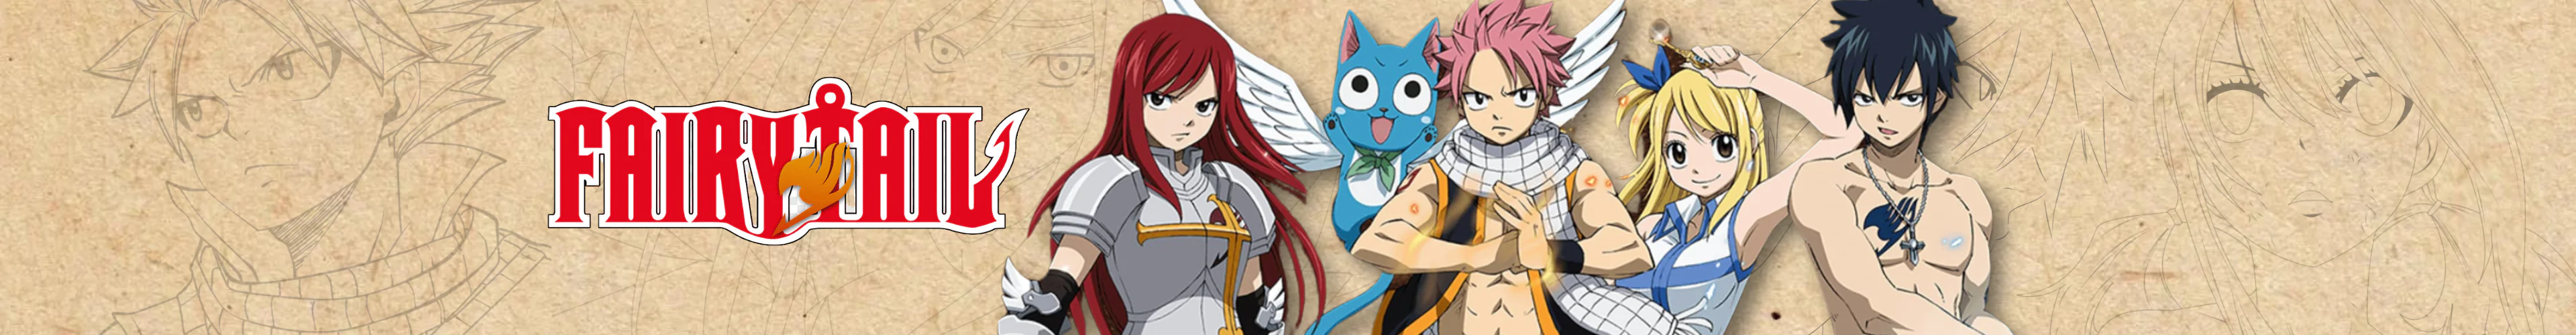 Fairy Tail towels banner